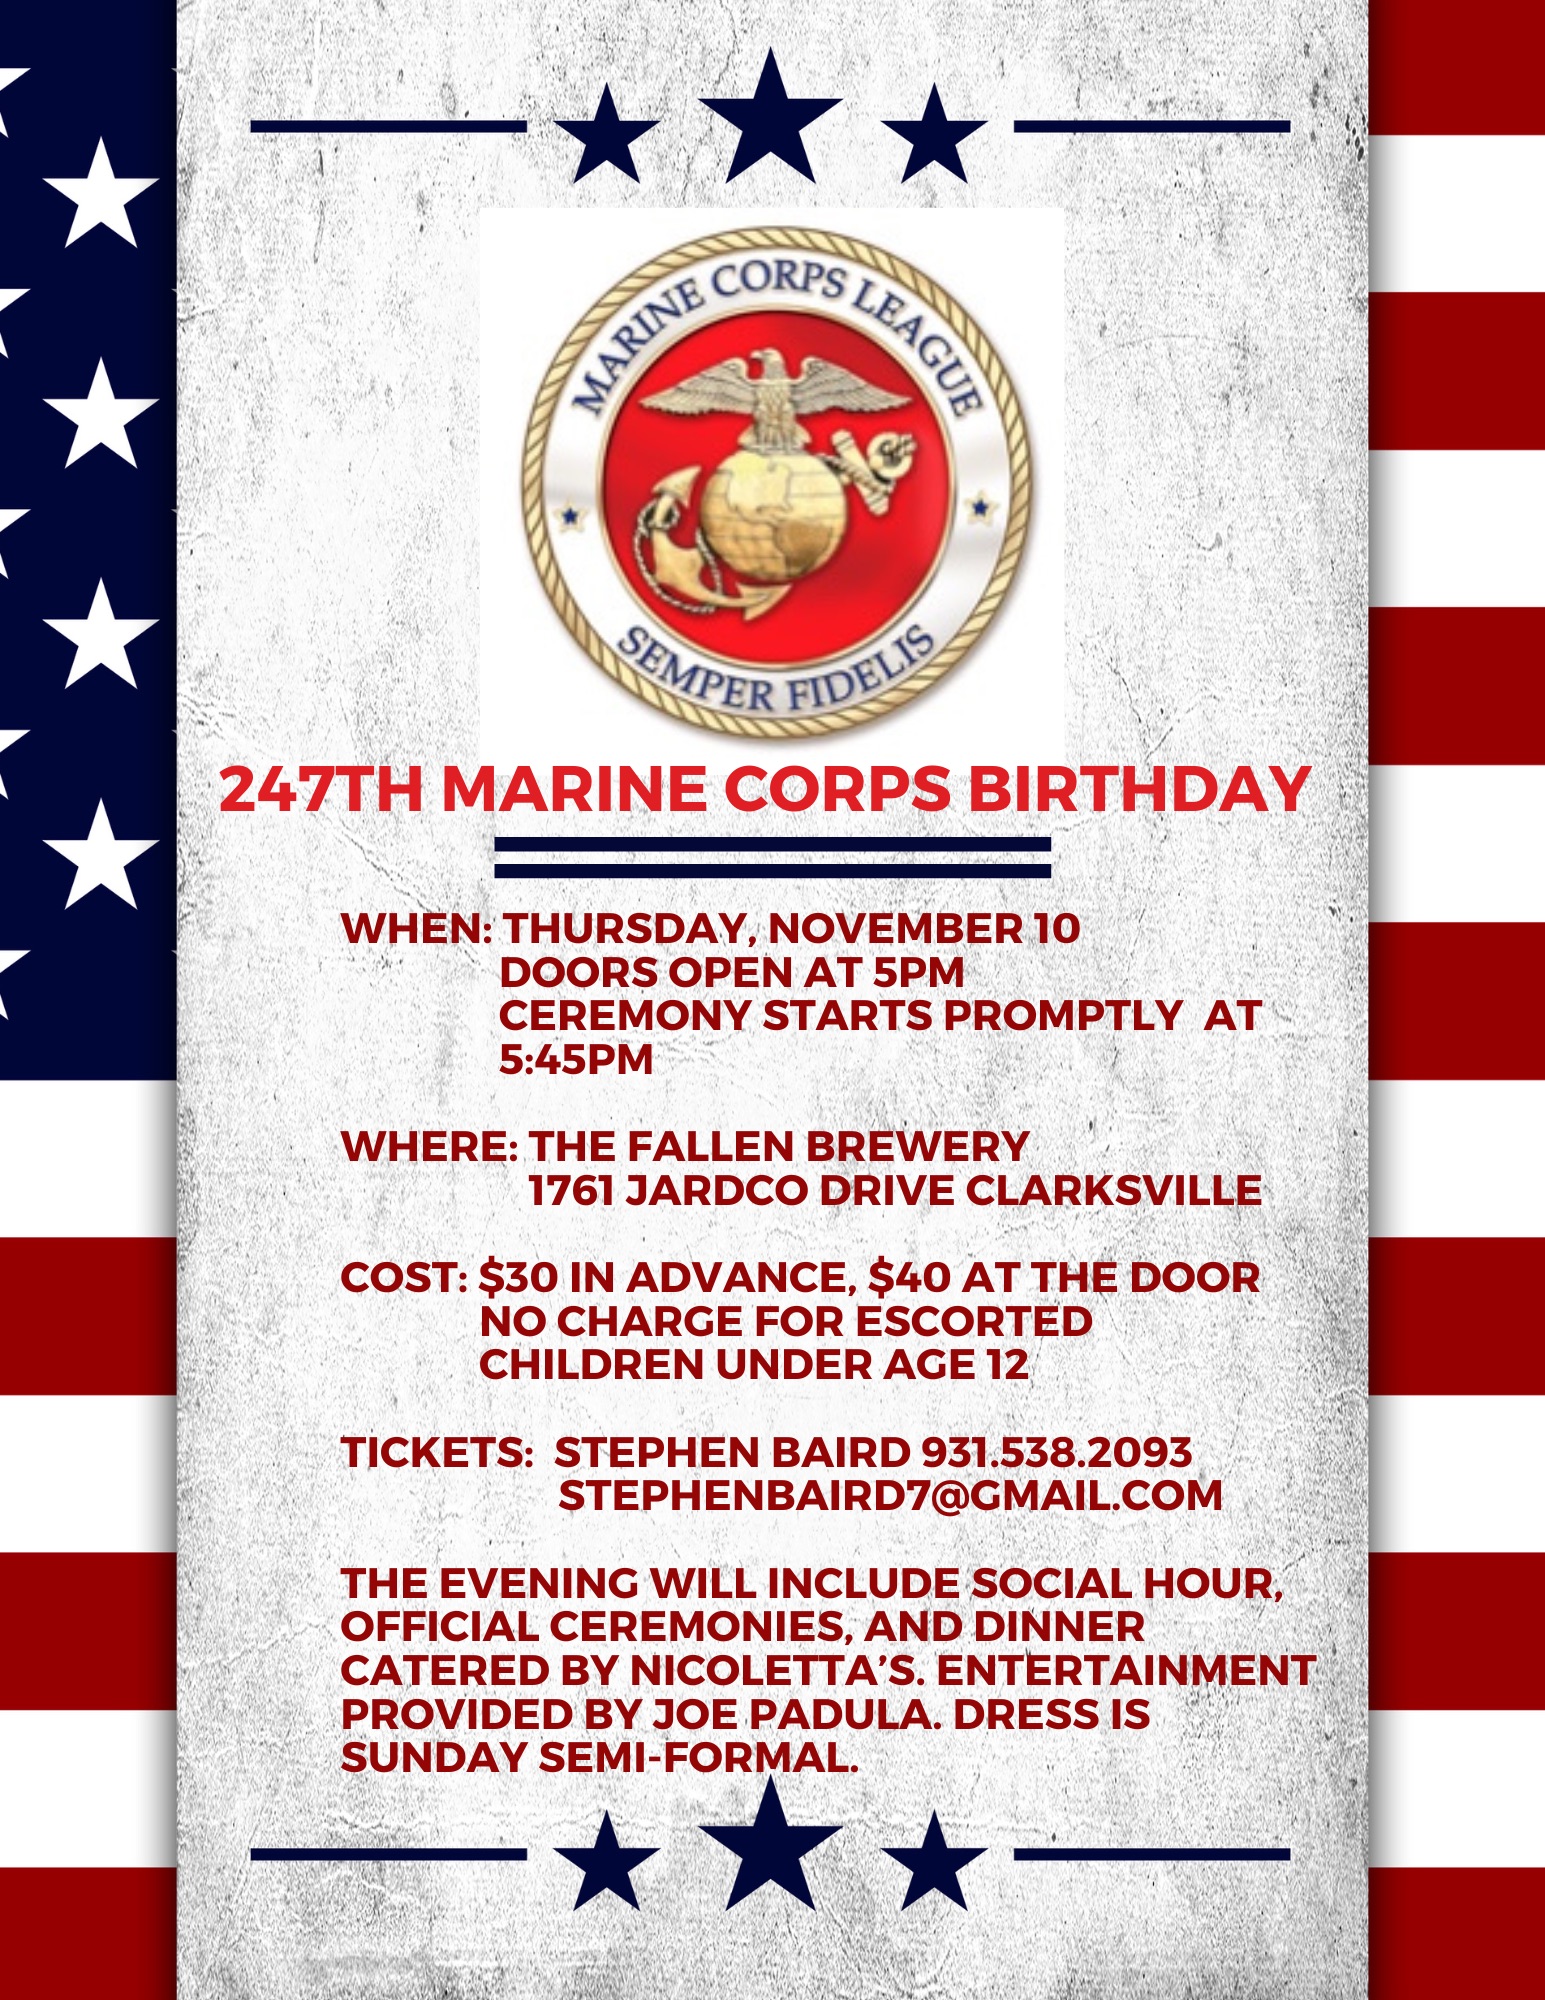 247th Marine Corps Birthday Celebration at The Fallen Brewery